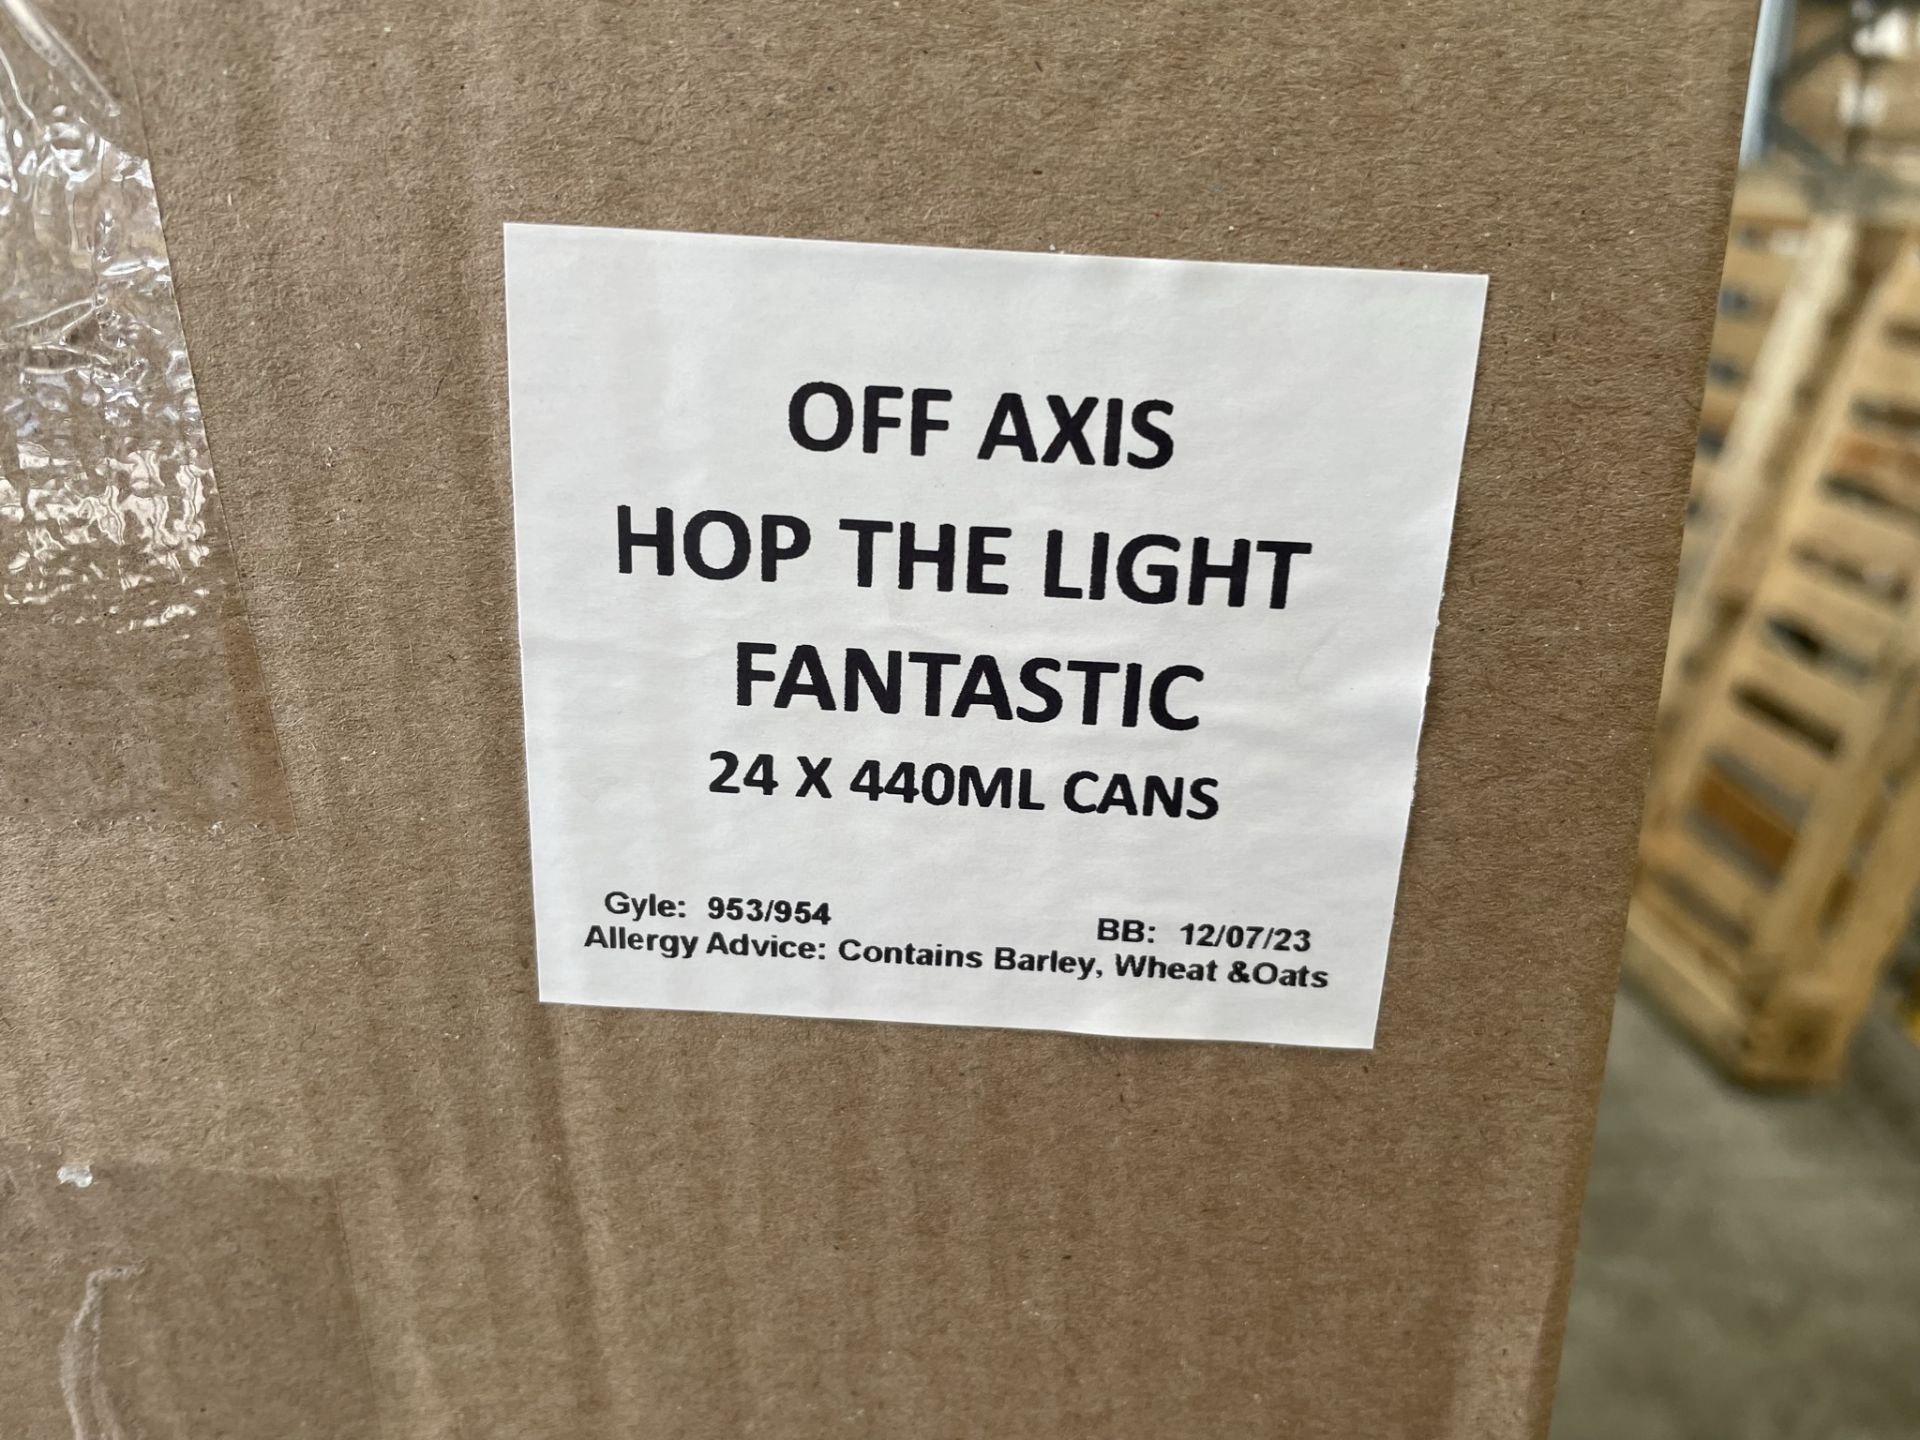 Approximately 1,944 x 440ml Cans of Off Axis Brew Co 'Hop The Light Fantastic' Pale Ale | BB: 12/07 - Image 5 of 5